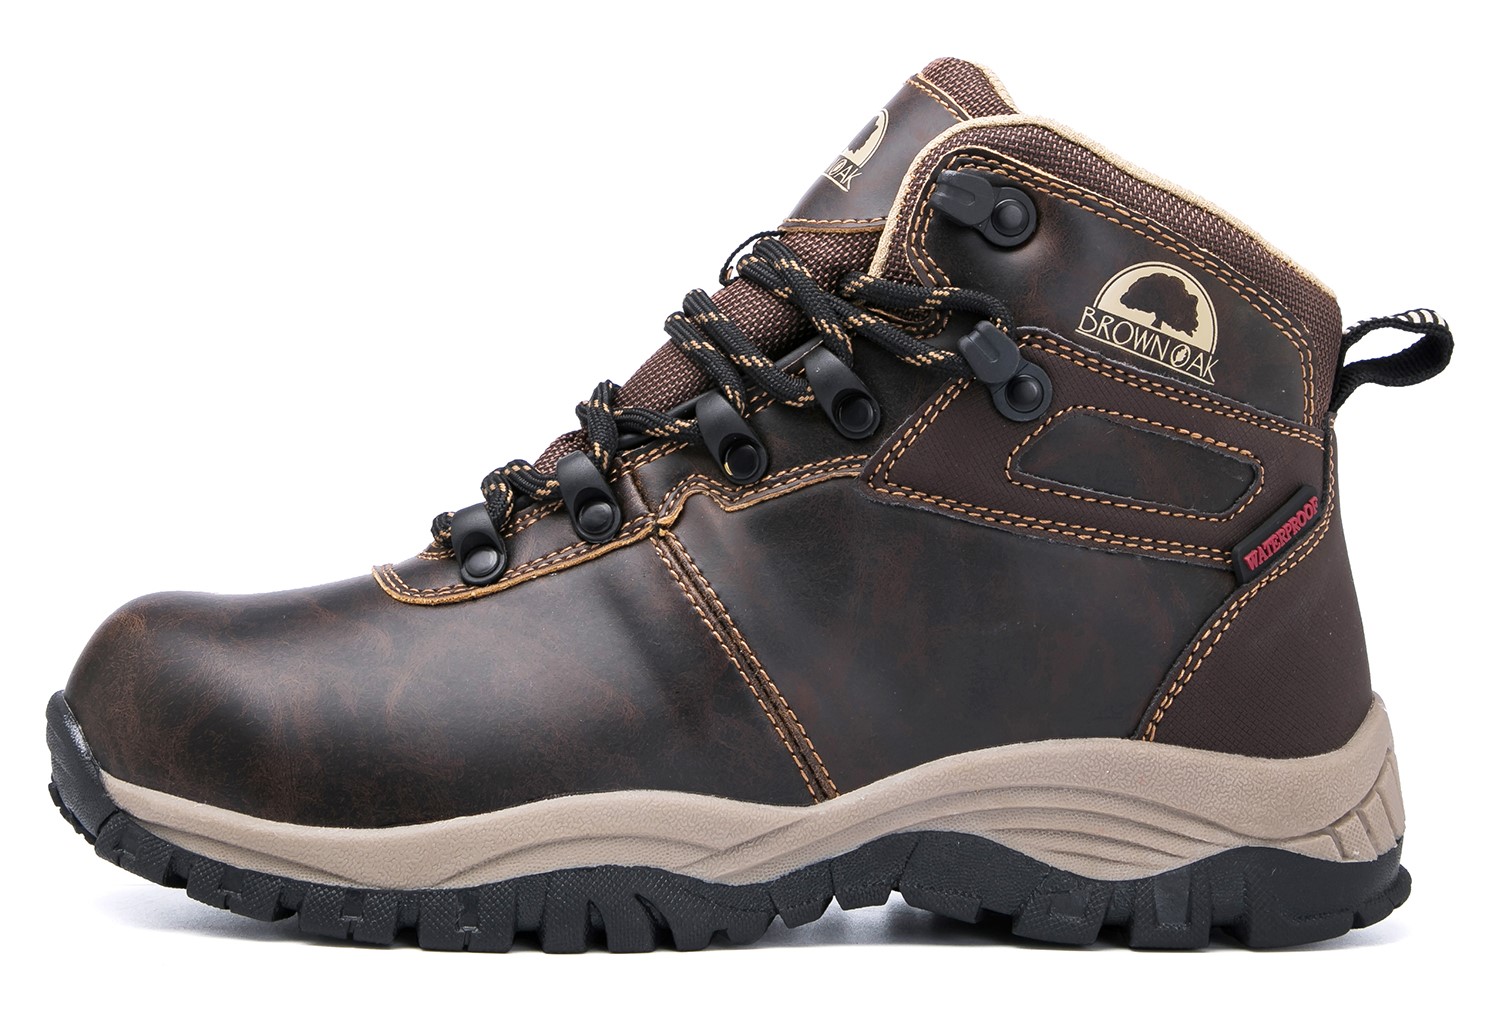 Brown Oak Womens Waterproof Trekking Camping Backpacking Outdoor Shoes Hiking Boots - image 3 of 7